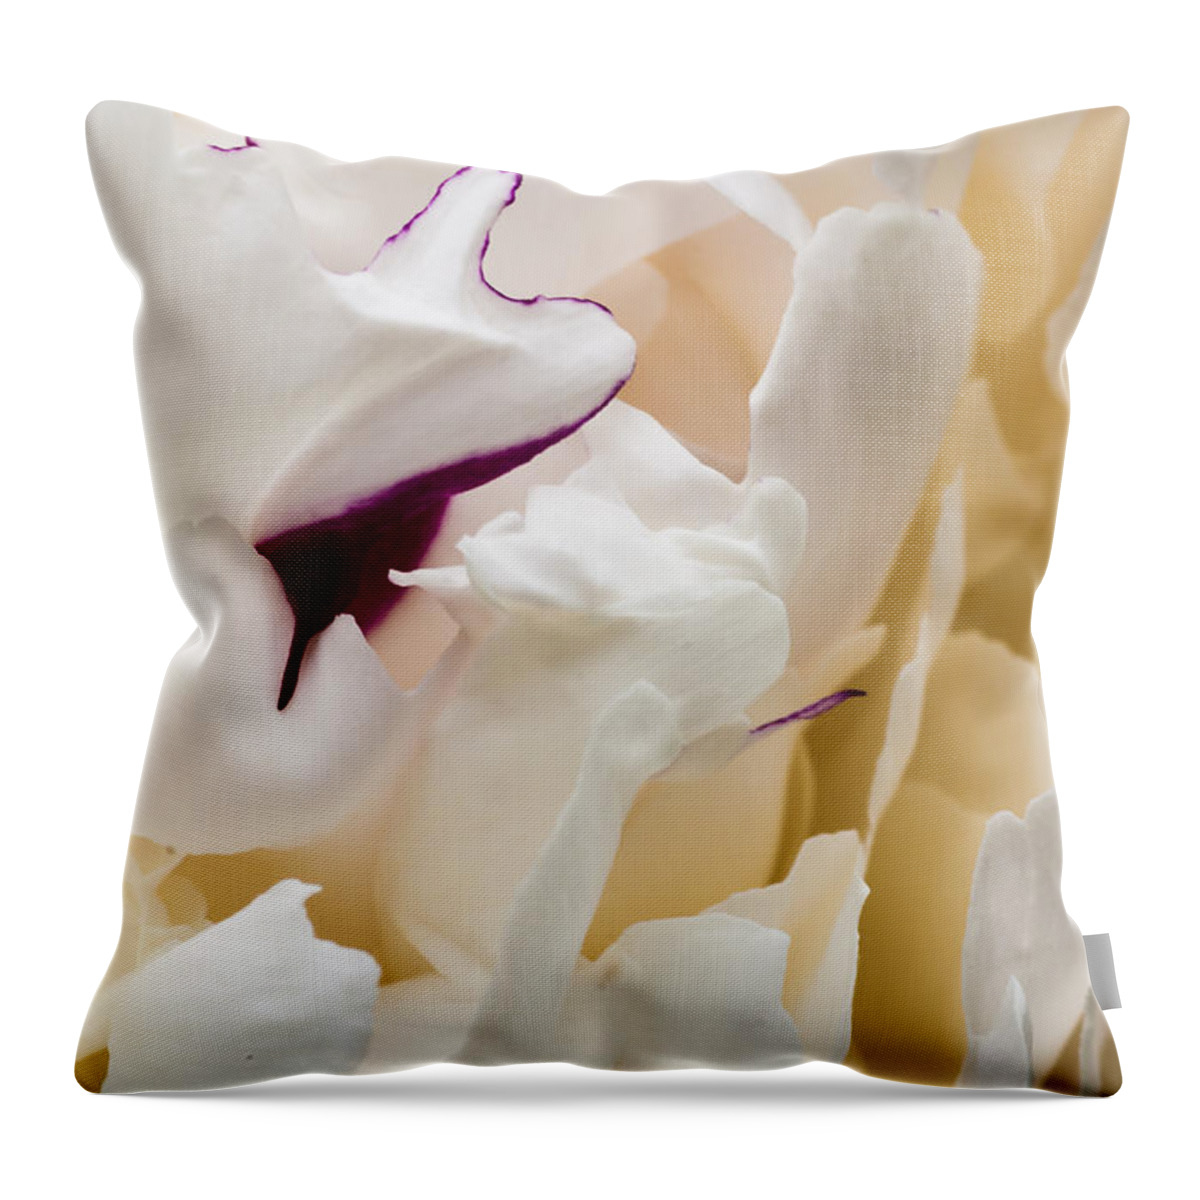 Flowers Throw Pillow featuring the photograph Peony by Steven Ralser